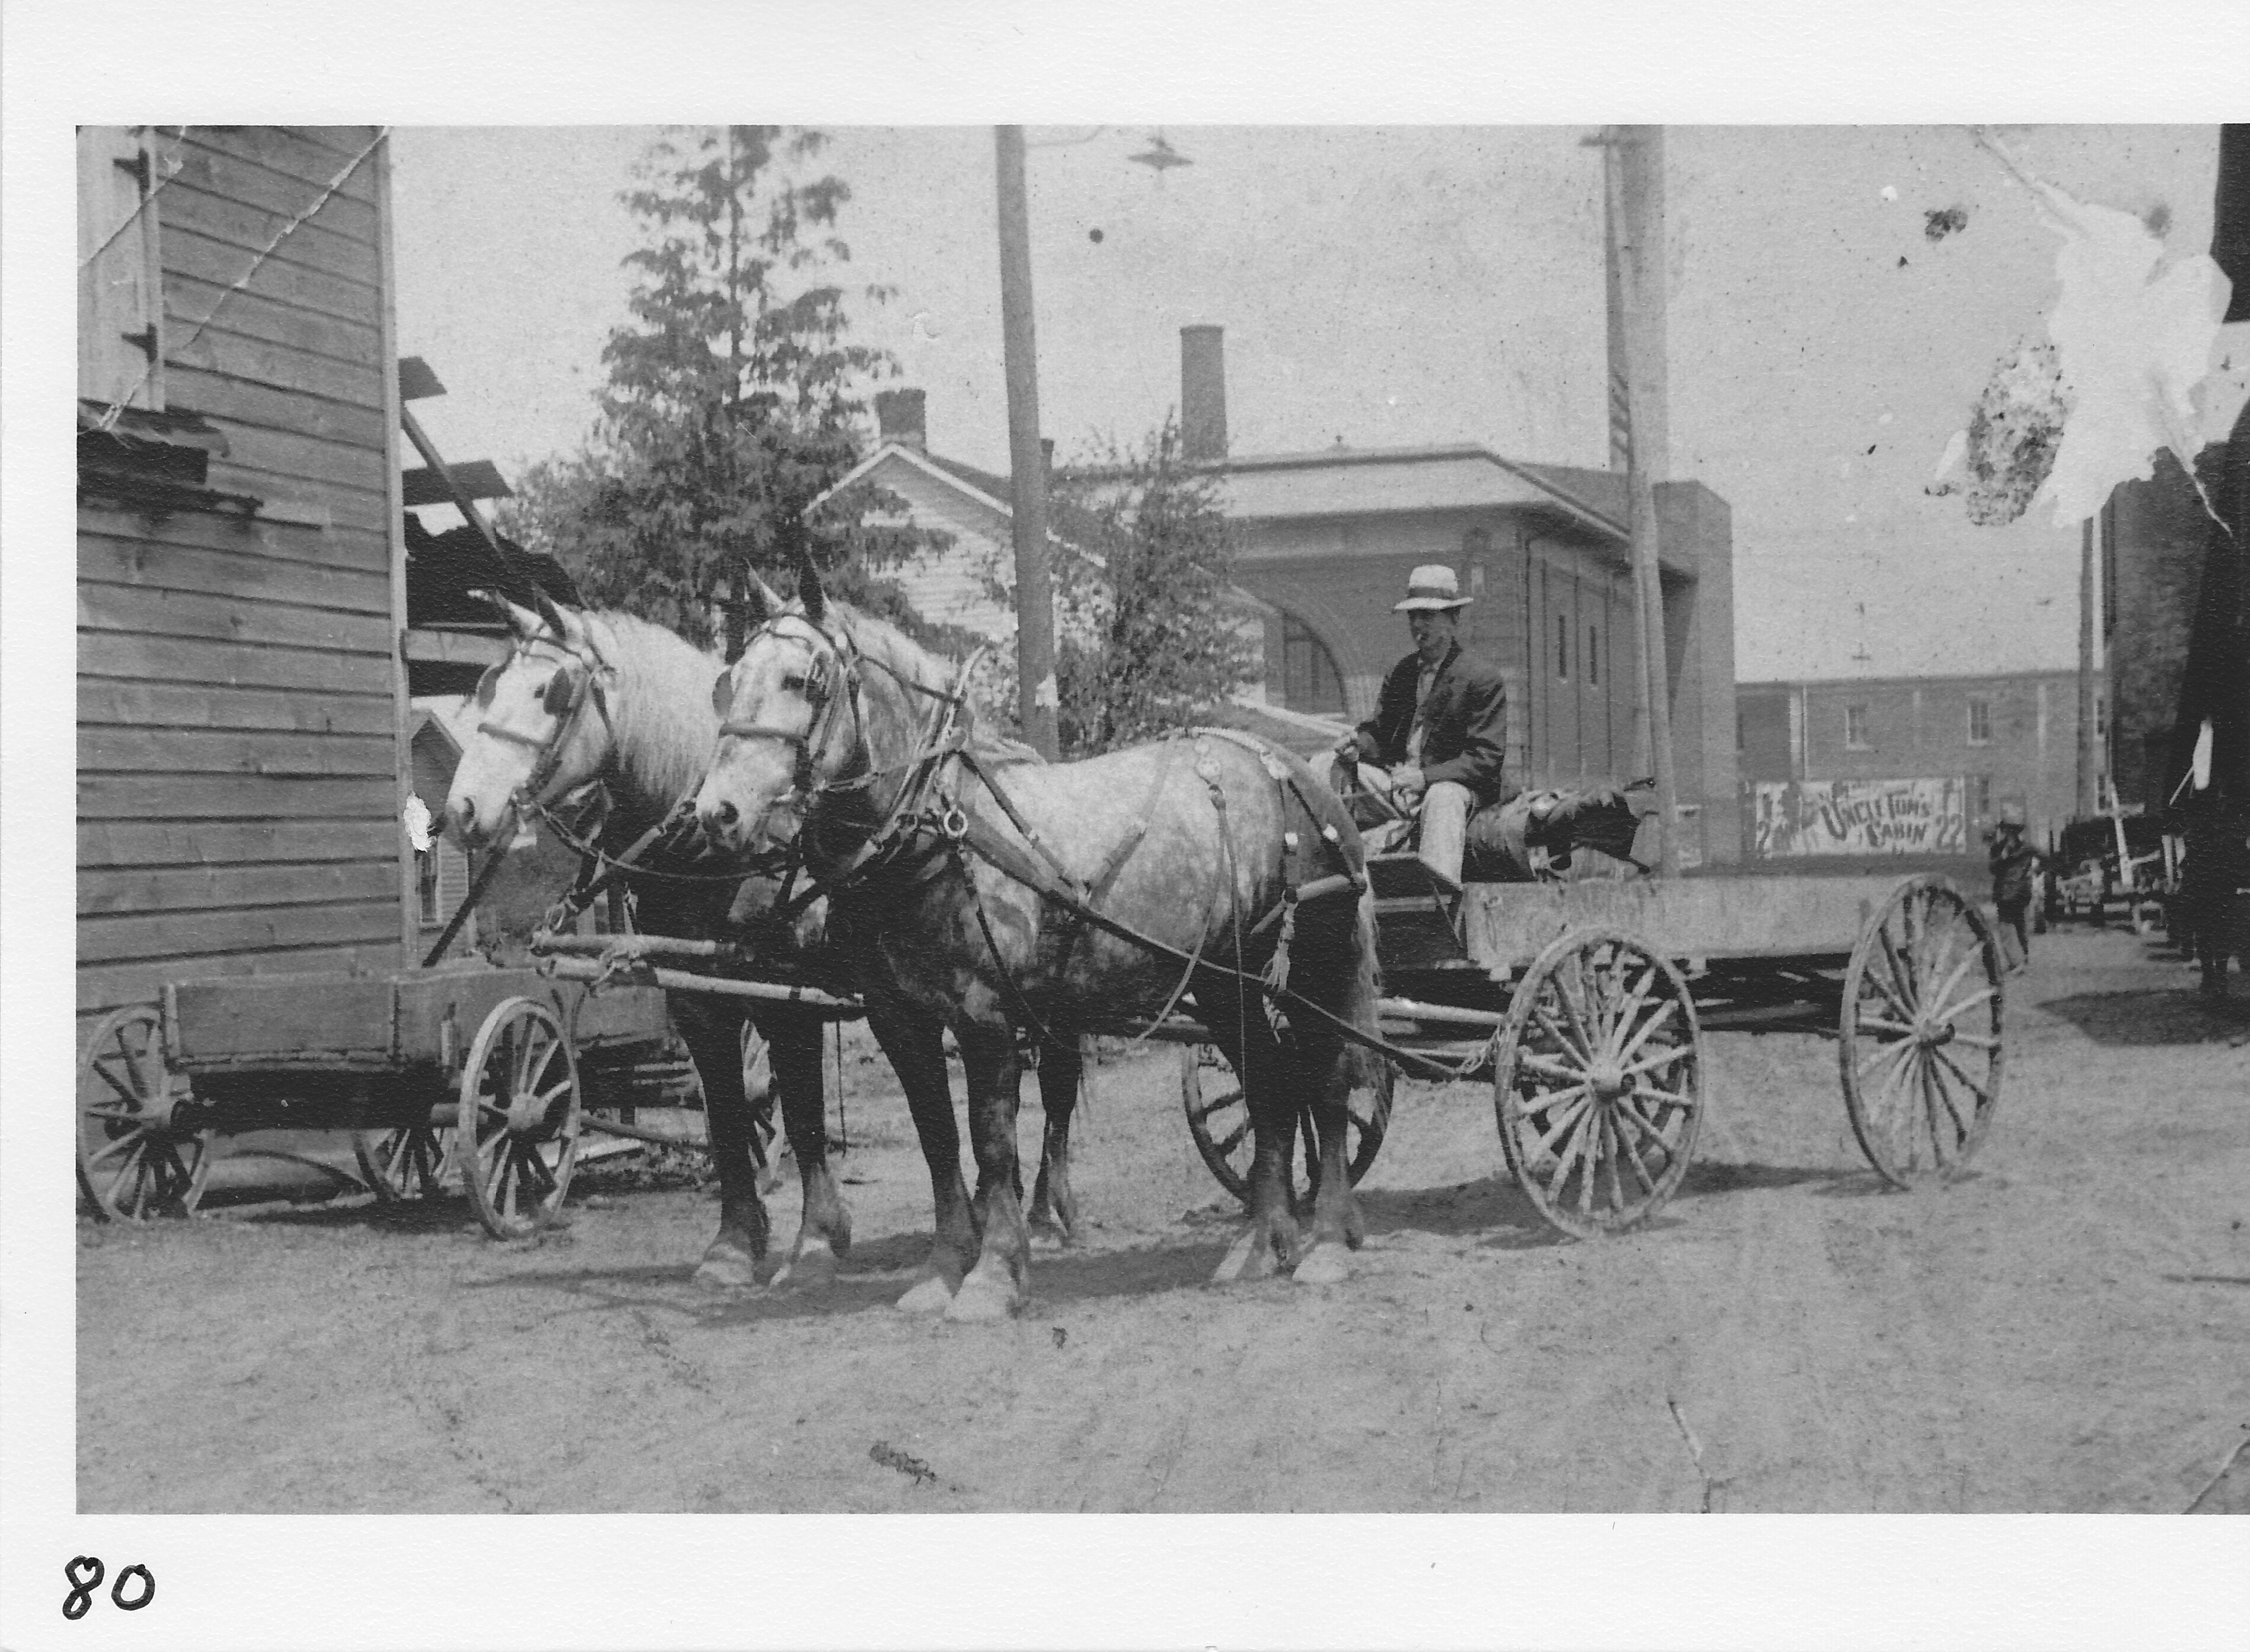 Neilingers Junk (also egg business), Baker Street.  Later owned by Charlie Fay.  Lester Terry in wagon.  Photo June 1909.  Note billboard advertising “Uncle Tom’s Cabin” in distance.